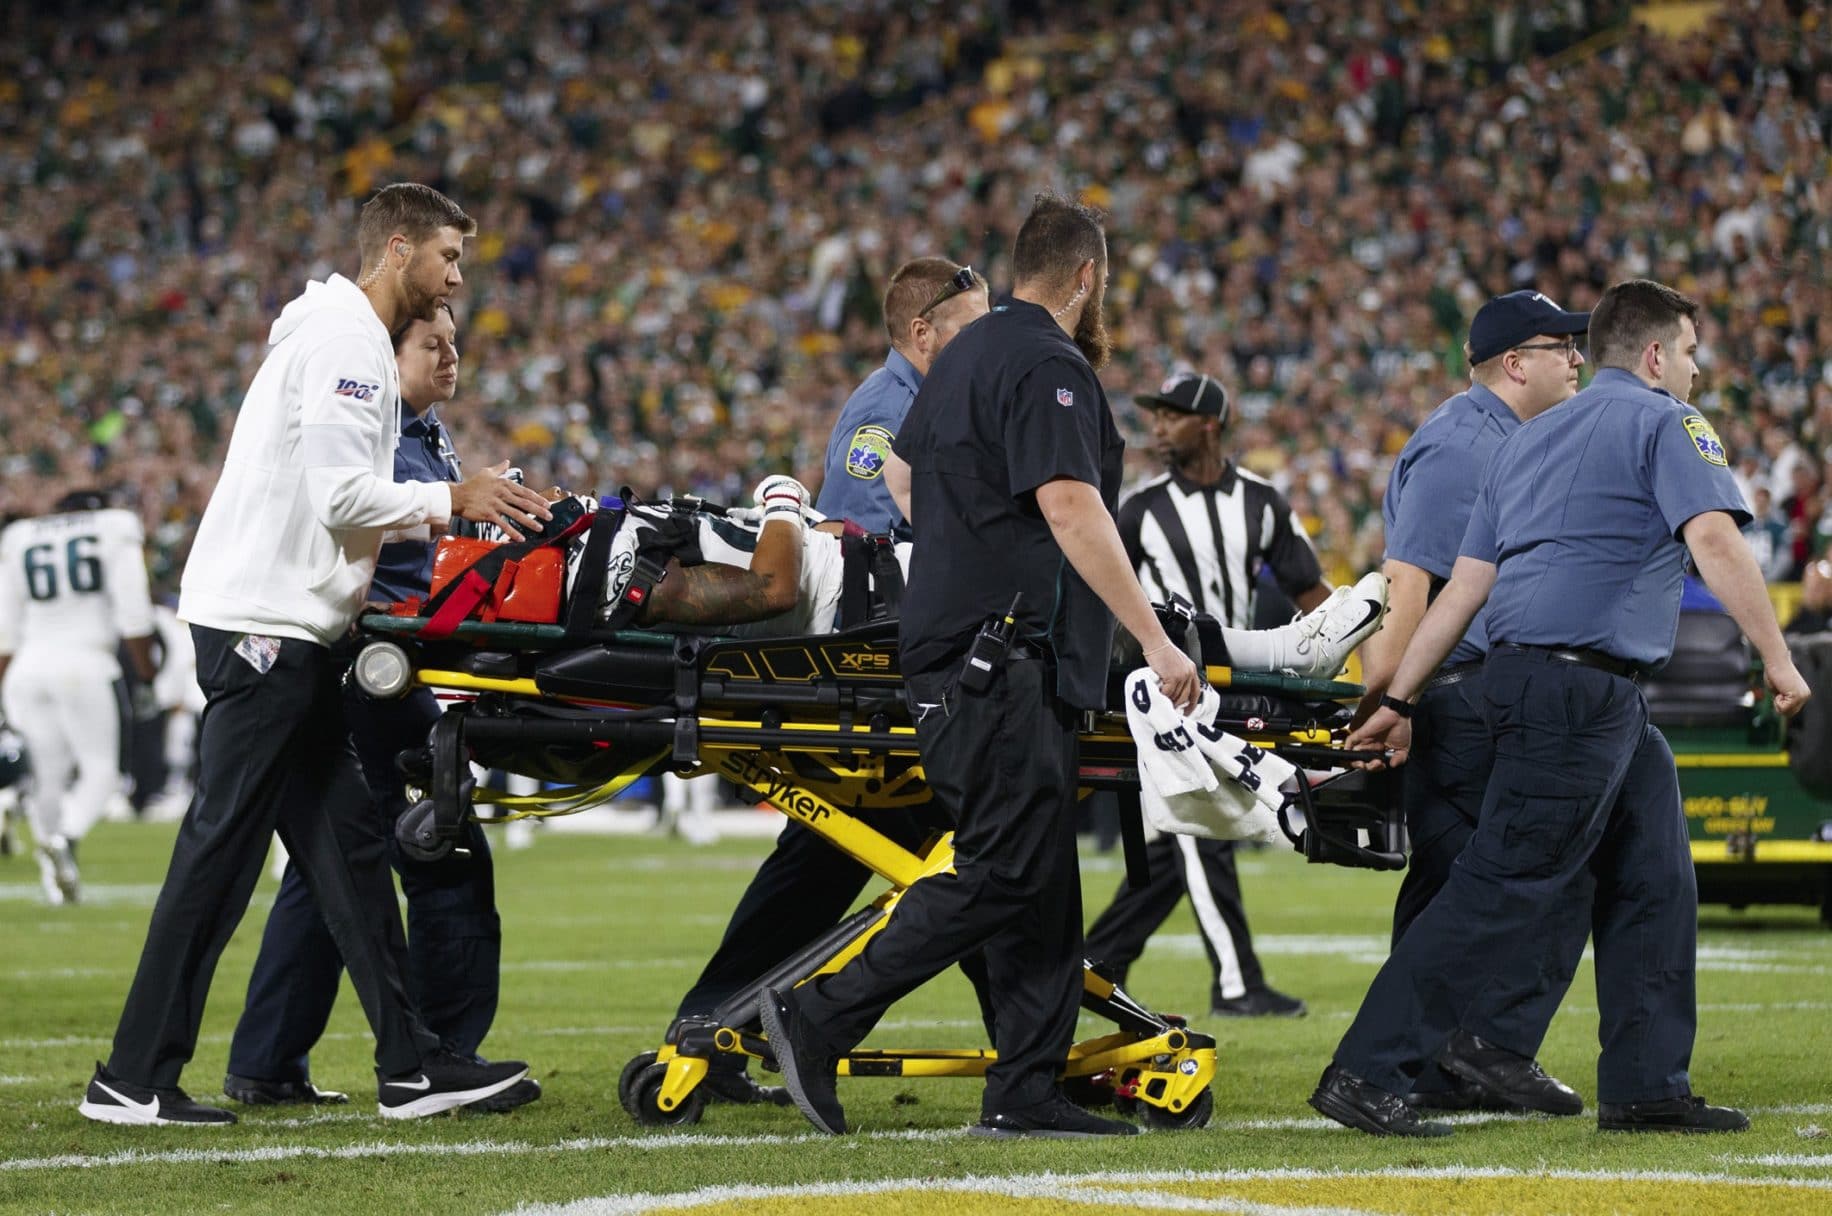 Avonte Maddox Reportedly “Week to Week” with Neck Sprain